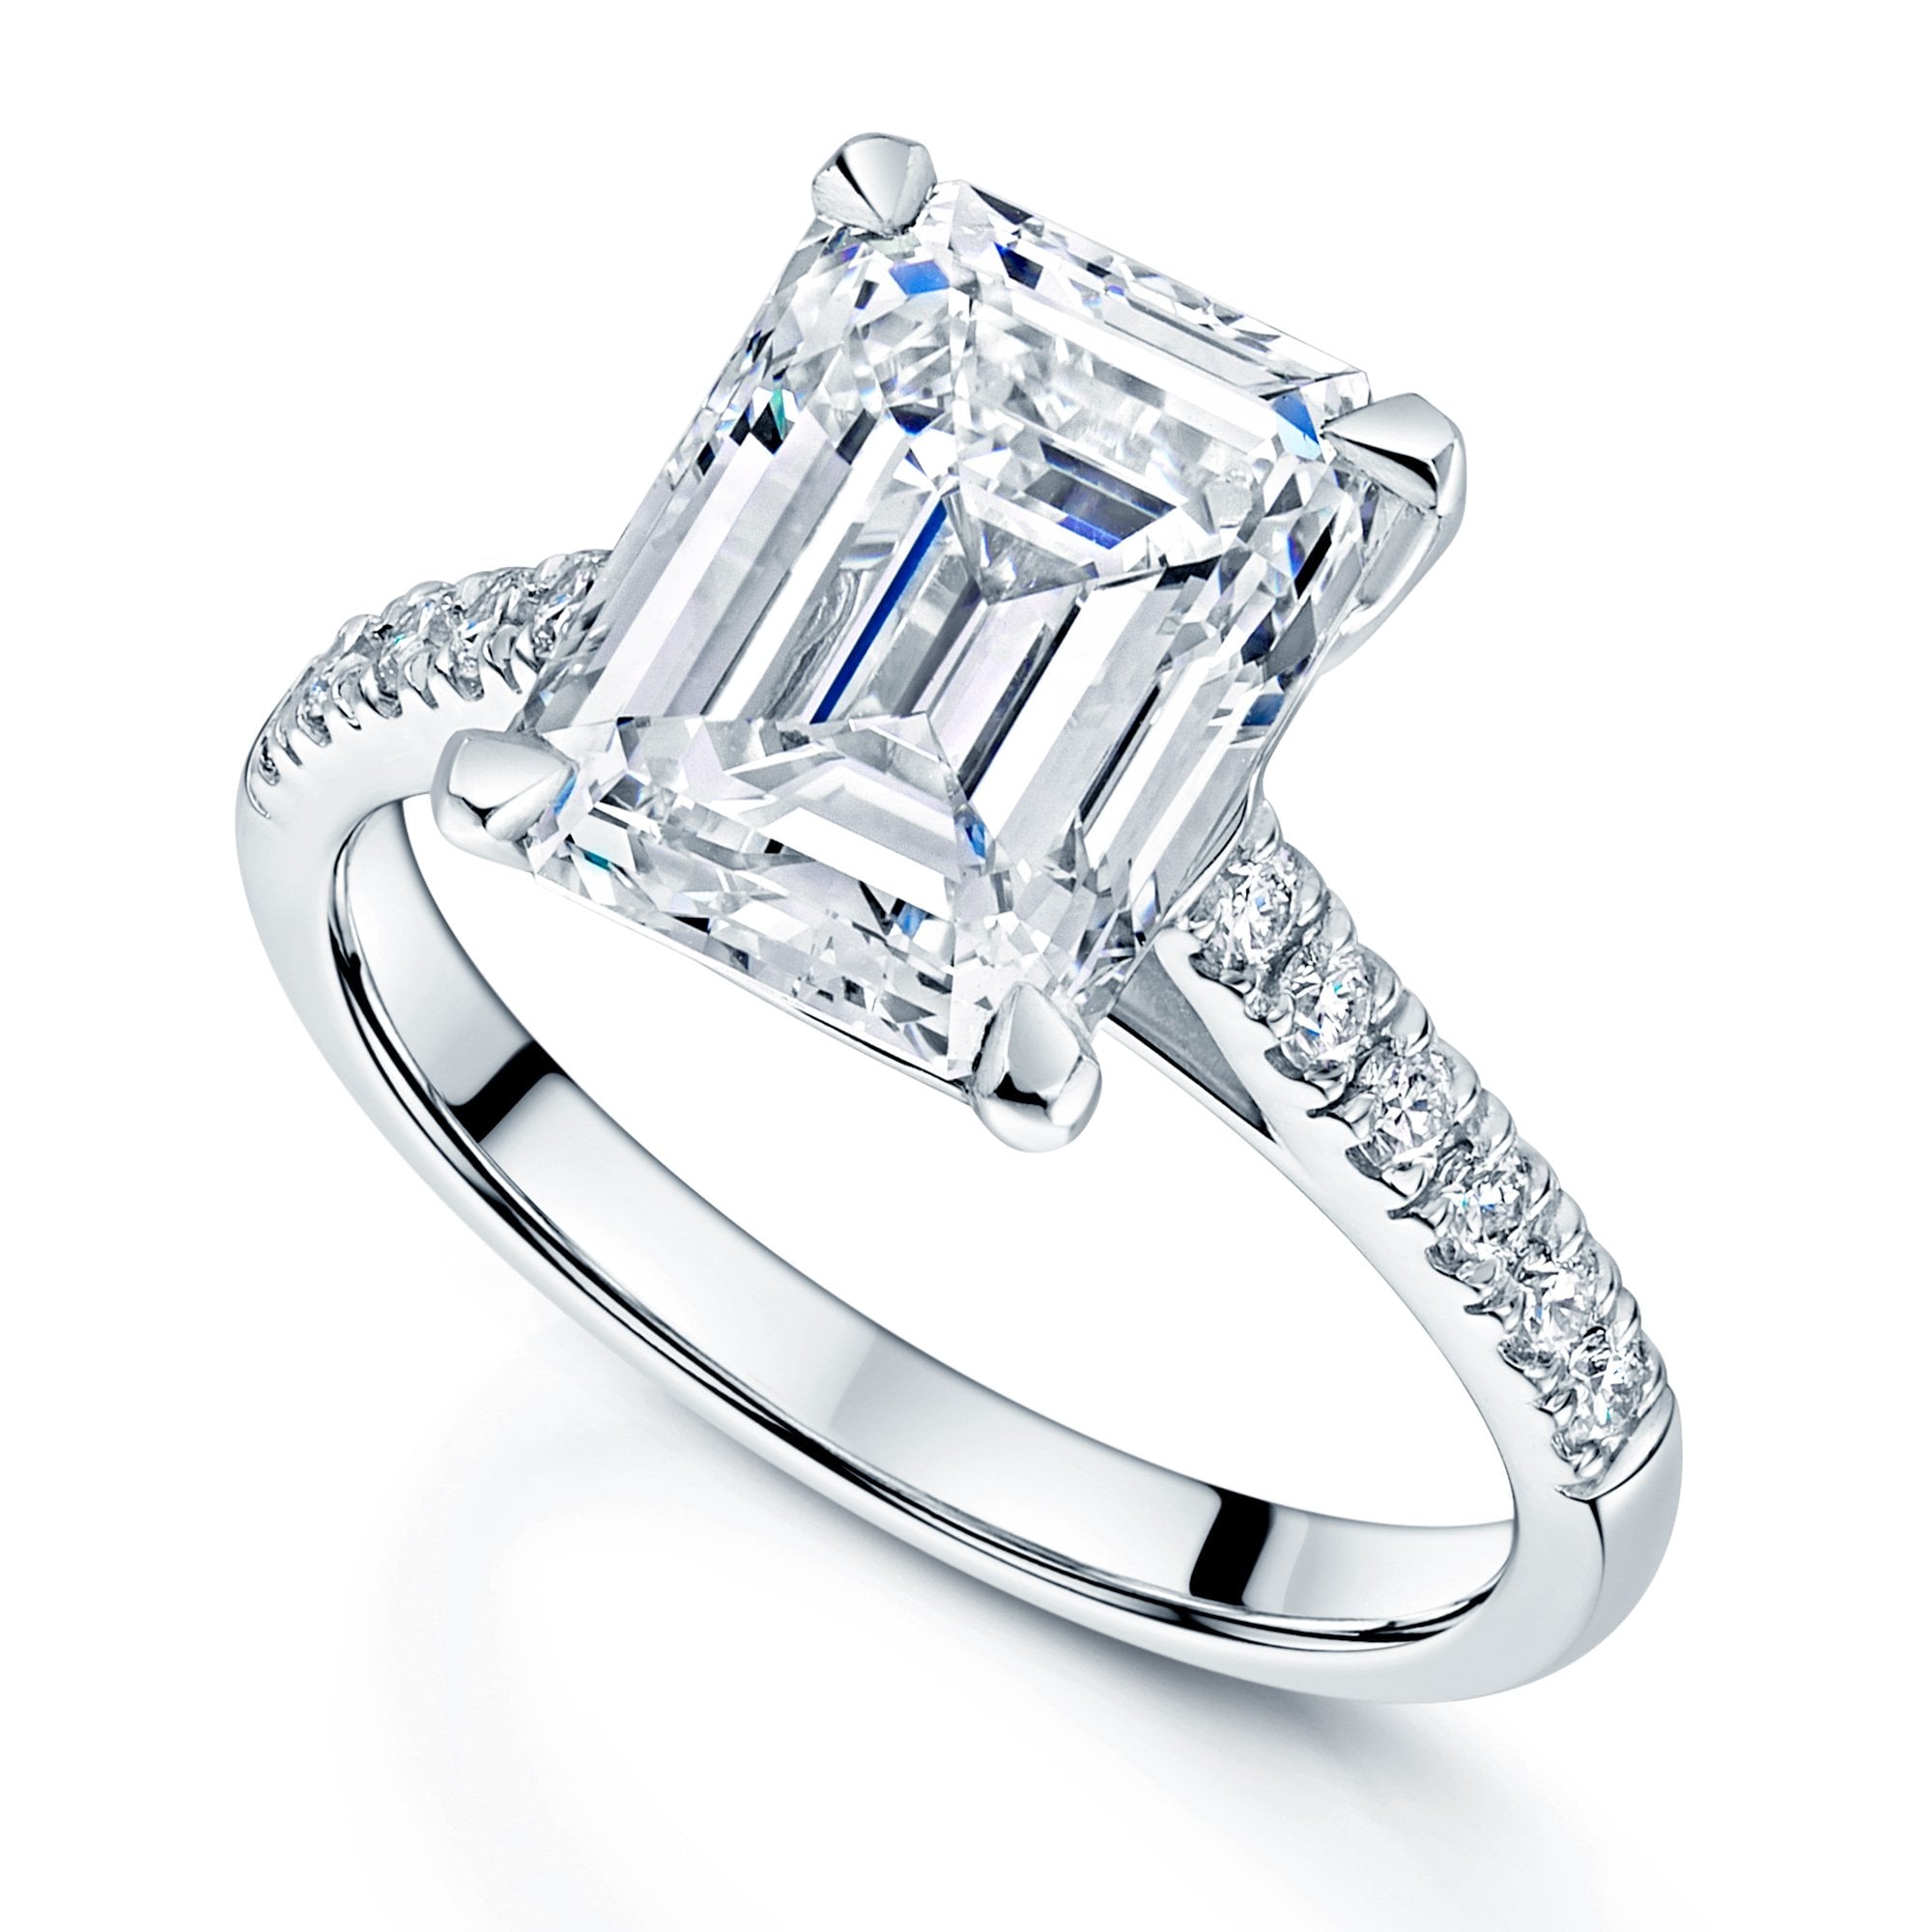 Platinum GIA Certificated 4.23 Carat Emerald Cut Diamond Solitaire Ring With Diamond Shoulders